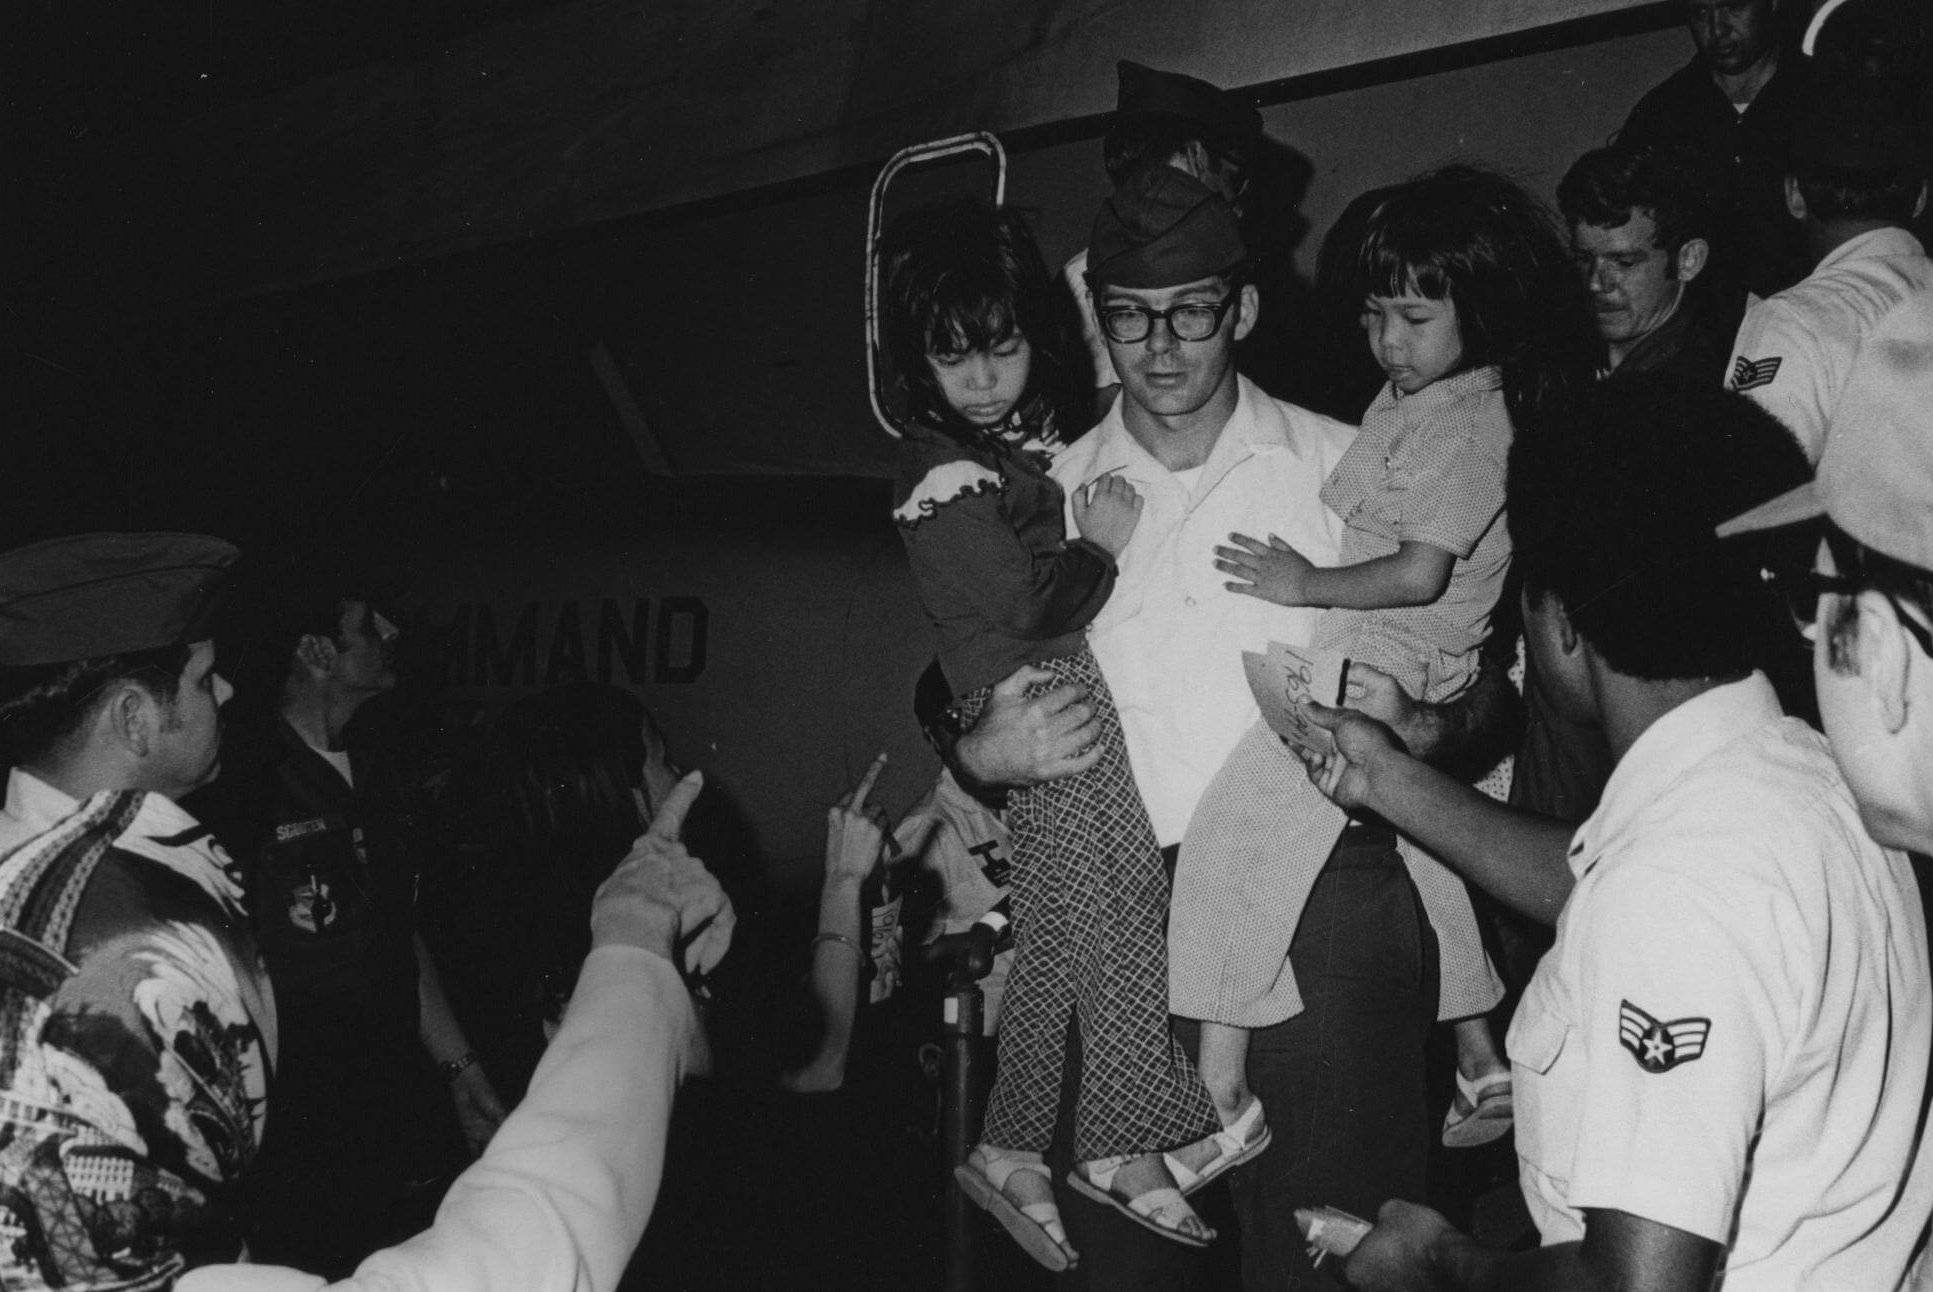 American soldier carrying two small Asian children, deplaning.